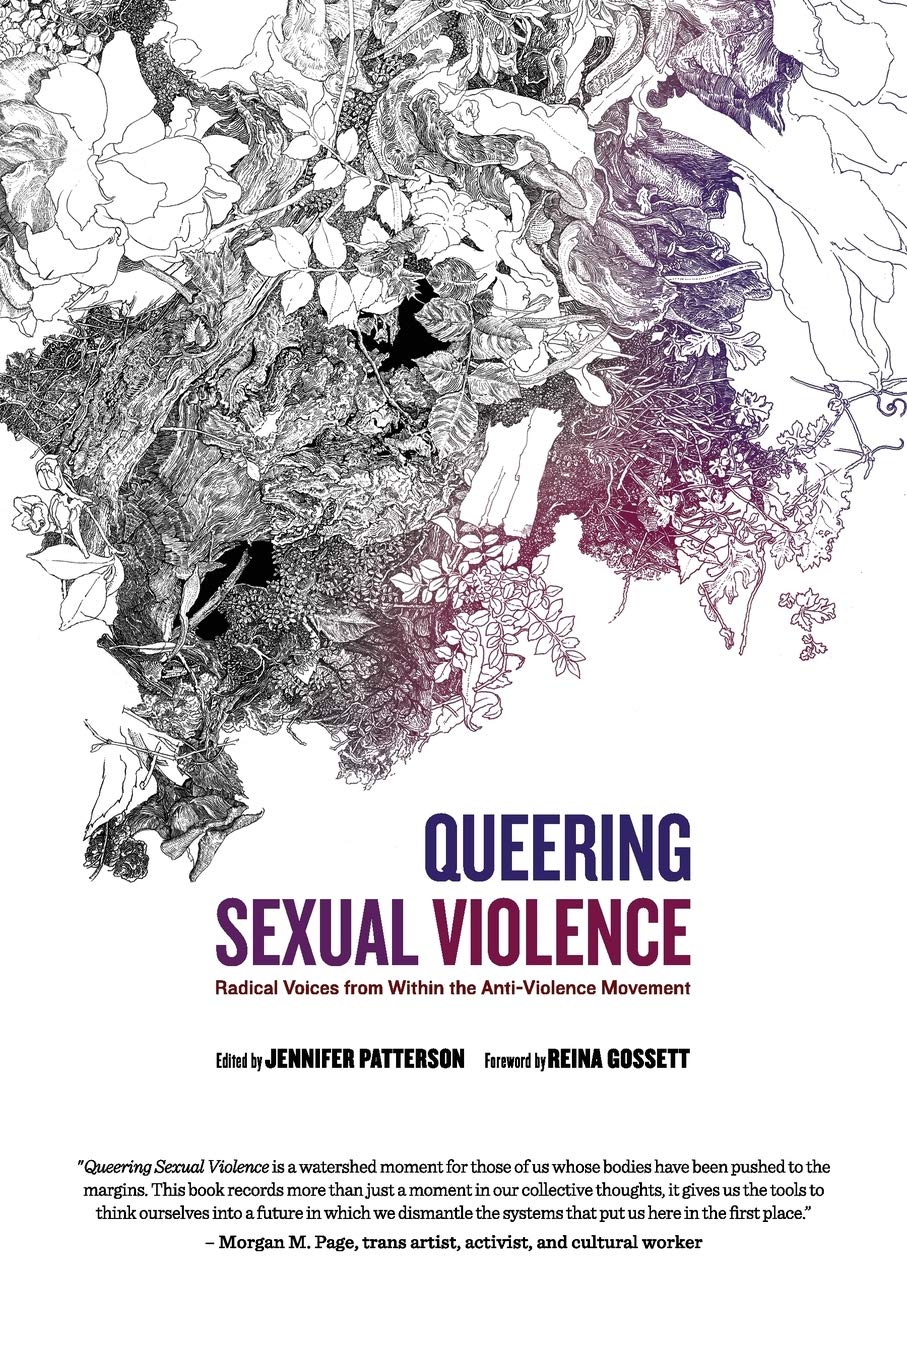 Queering Sexual Violence: Radical Voices from Within the Anti-Violence Movement